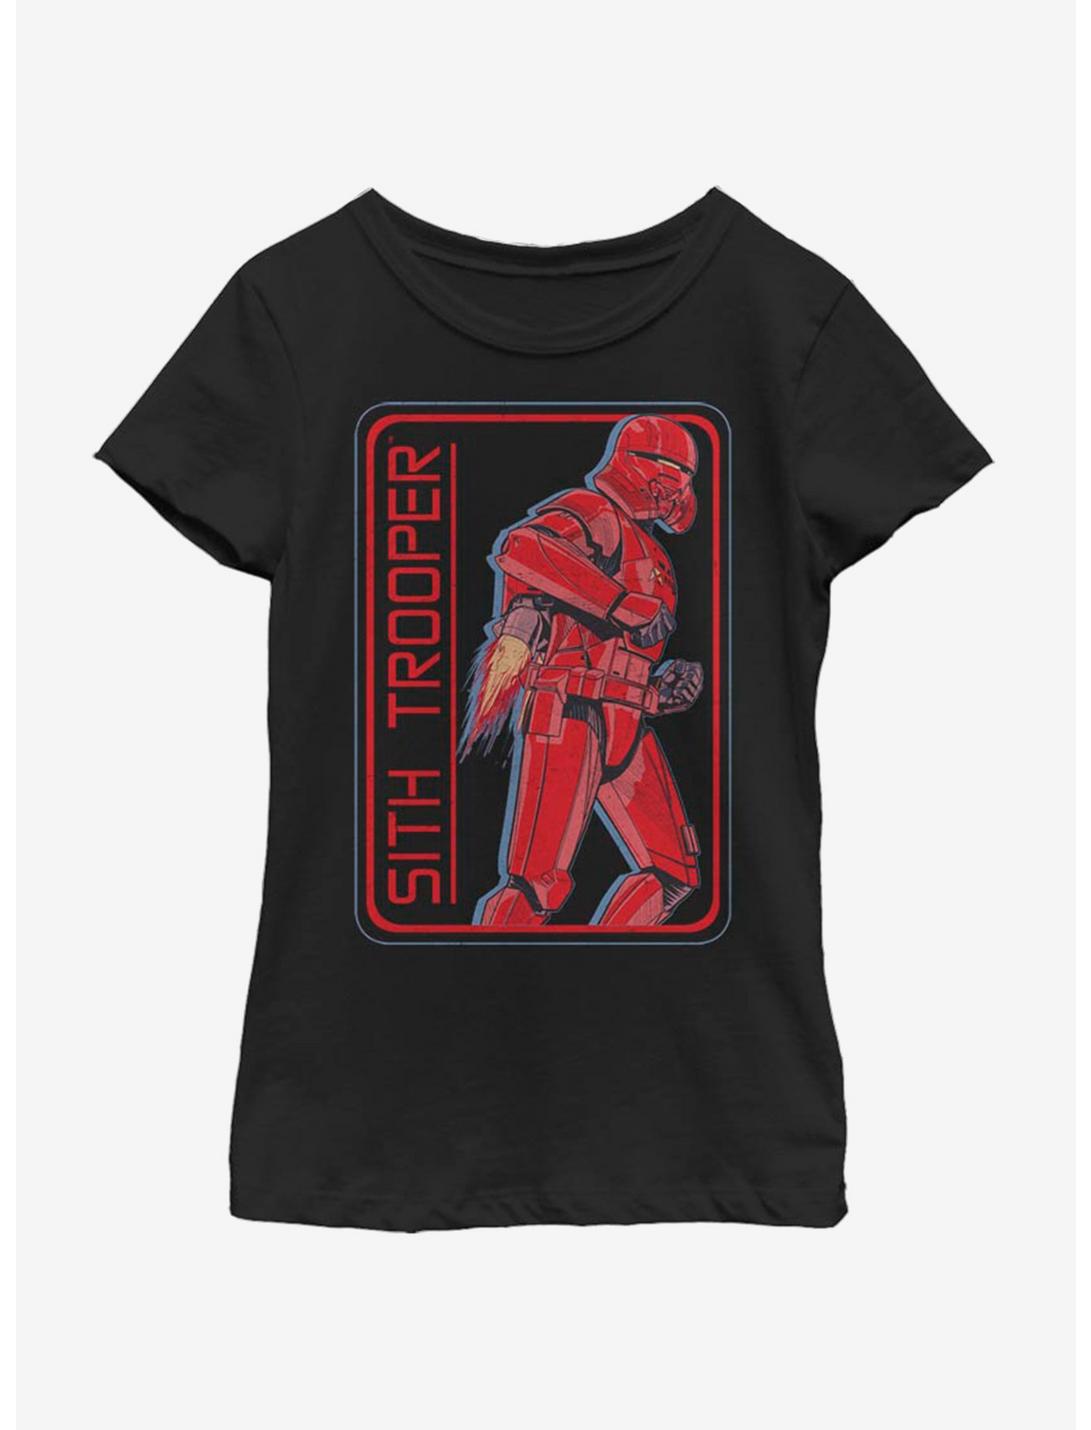 Star Wars The Rise Of Skywalker Retro Sith Trooper Youth Girls T-Shirt, BLACK, hi-res